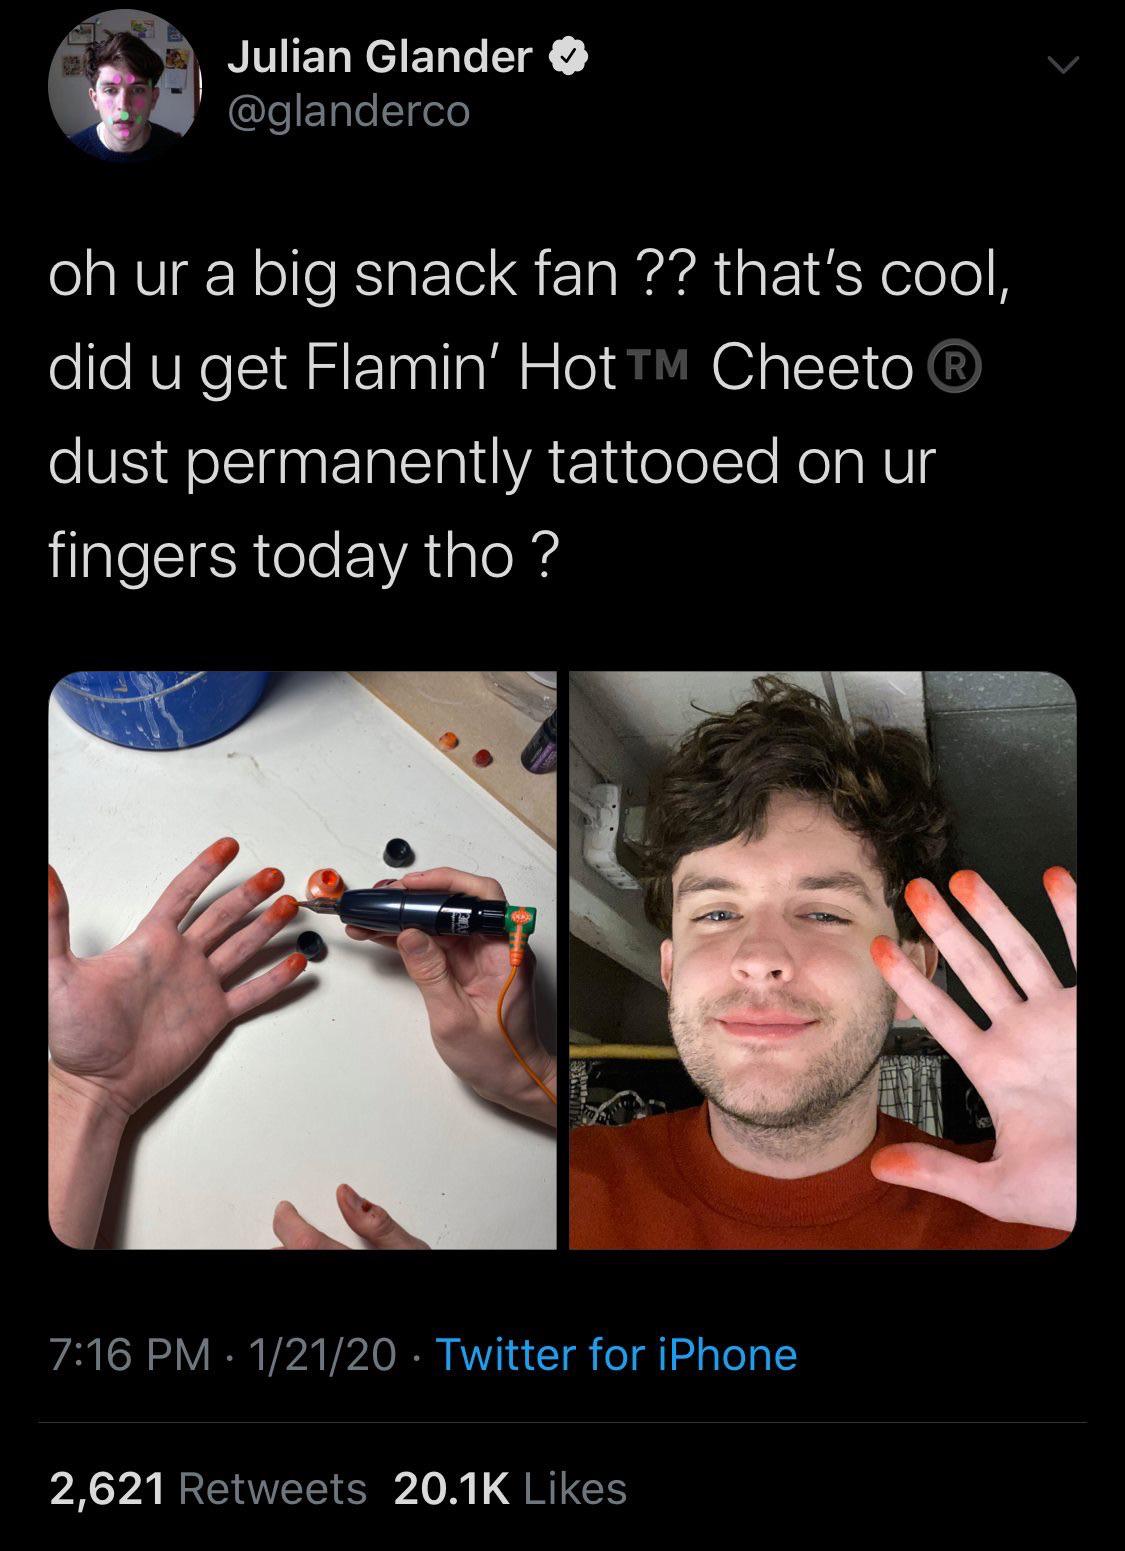 cheeto dust tattoo - Julian Glander 3 oh ur a big snack fan ?? that's cool, did u get Flamin' Hot Tm Cheeto dust permanently tattooed on ur fingers today tho? 12120 Twitter for iPhone 2,621